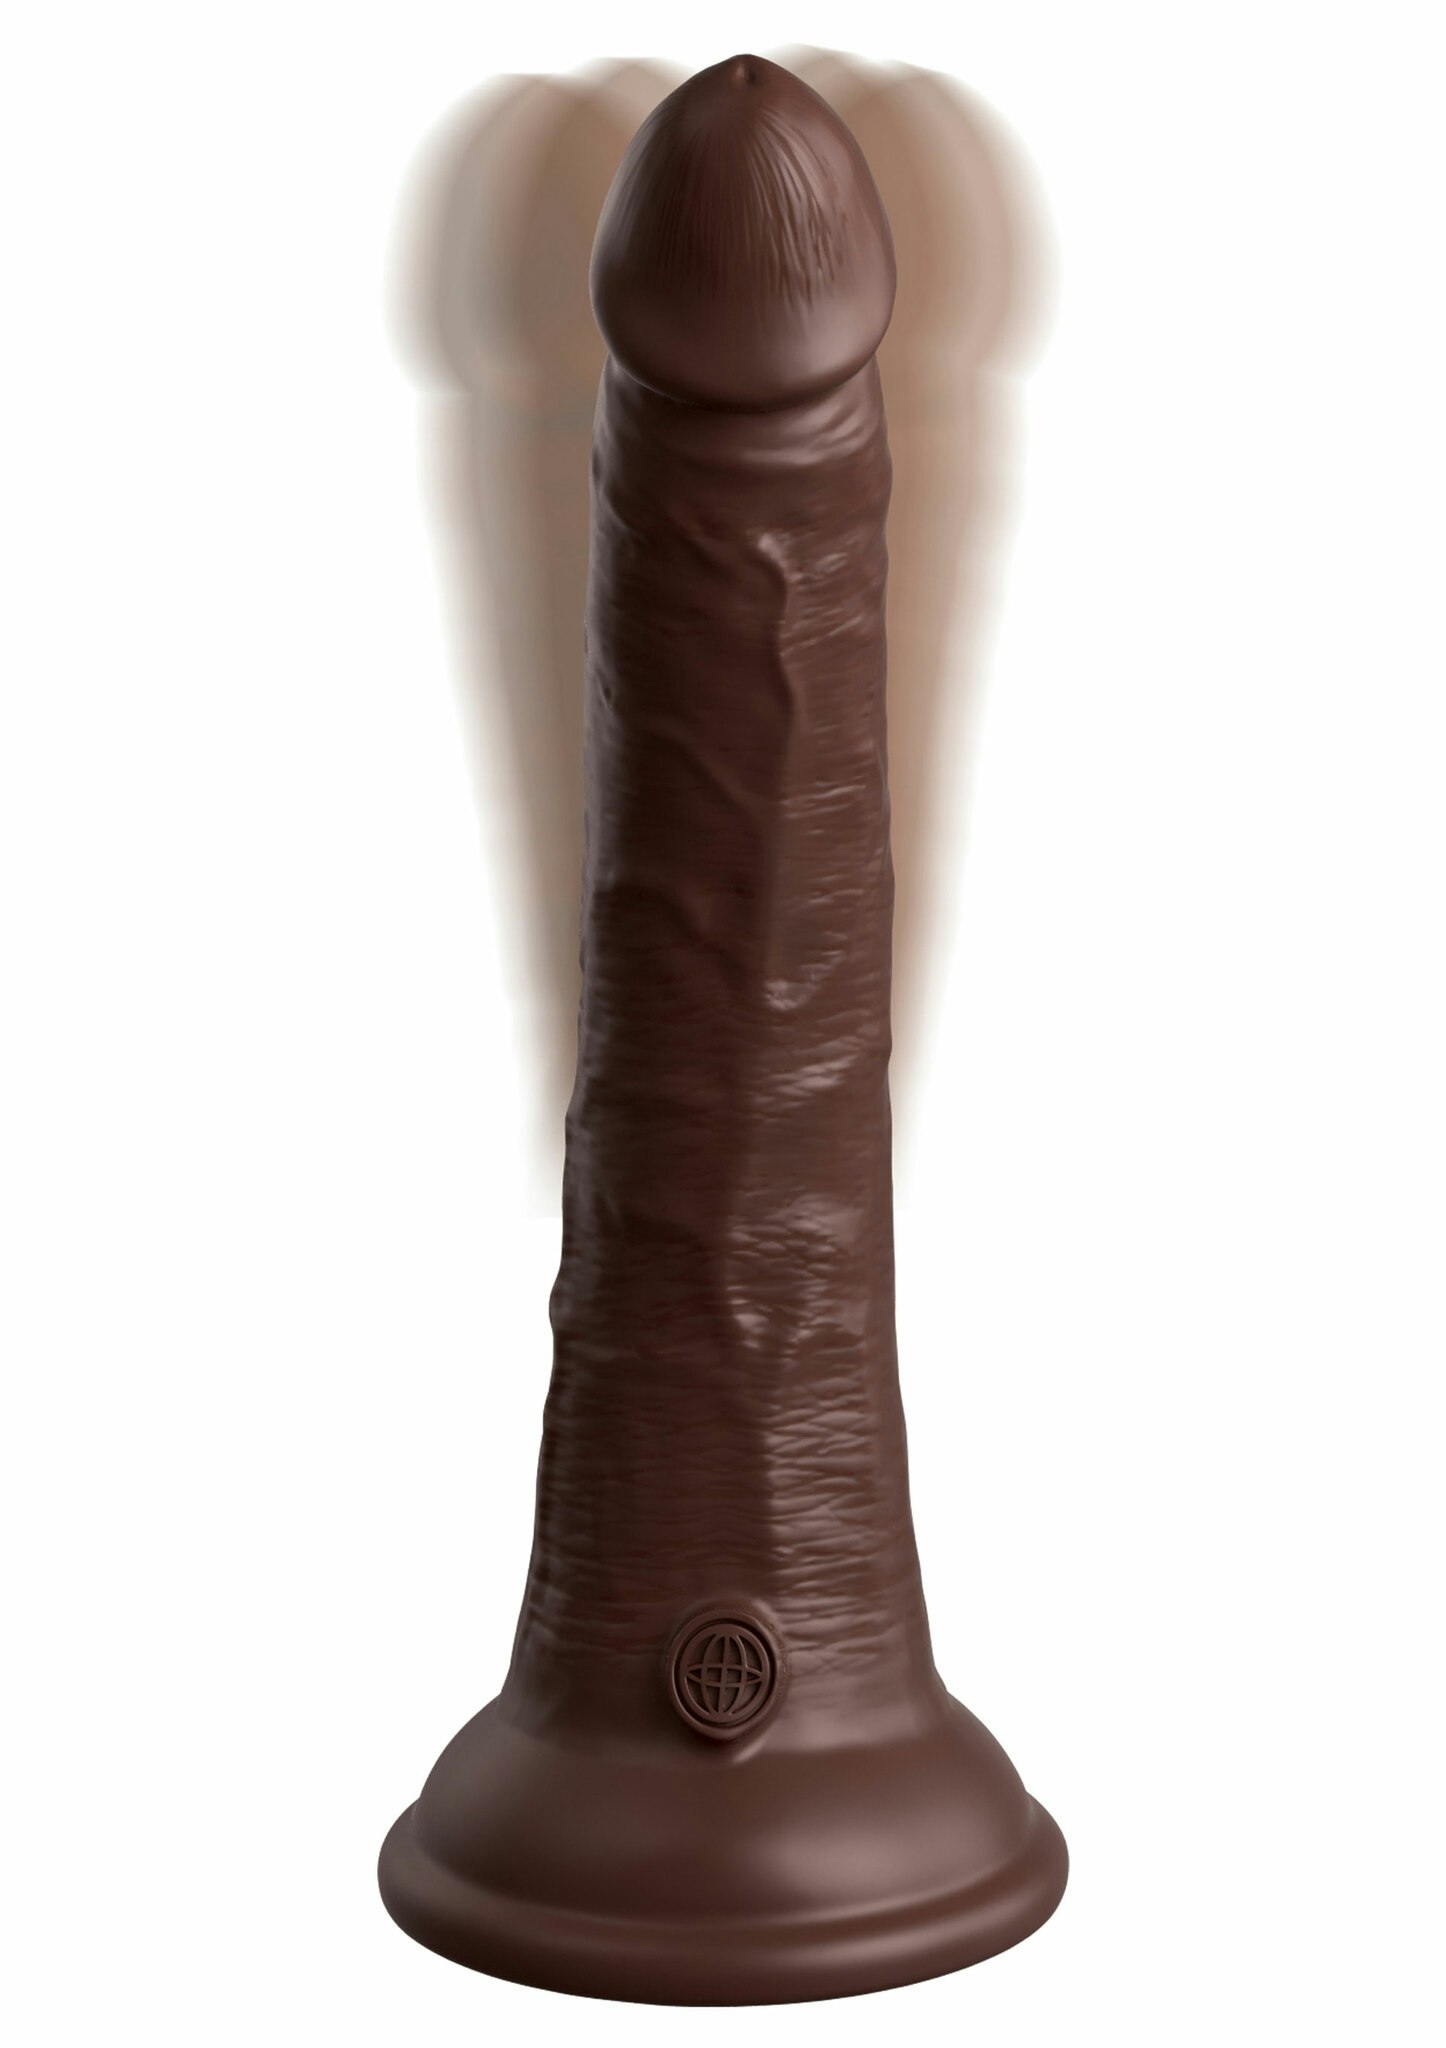 King Cock - Dual Density Silicone Vibe Cock 7 inch